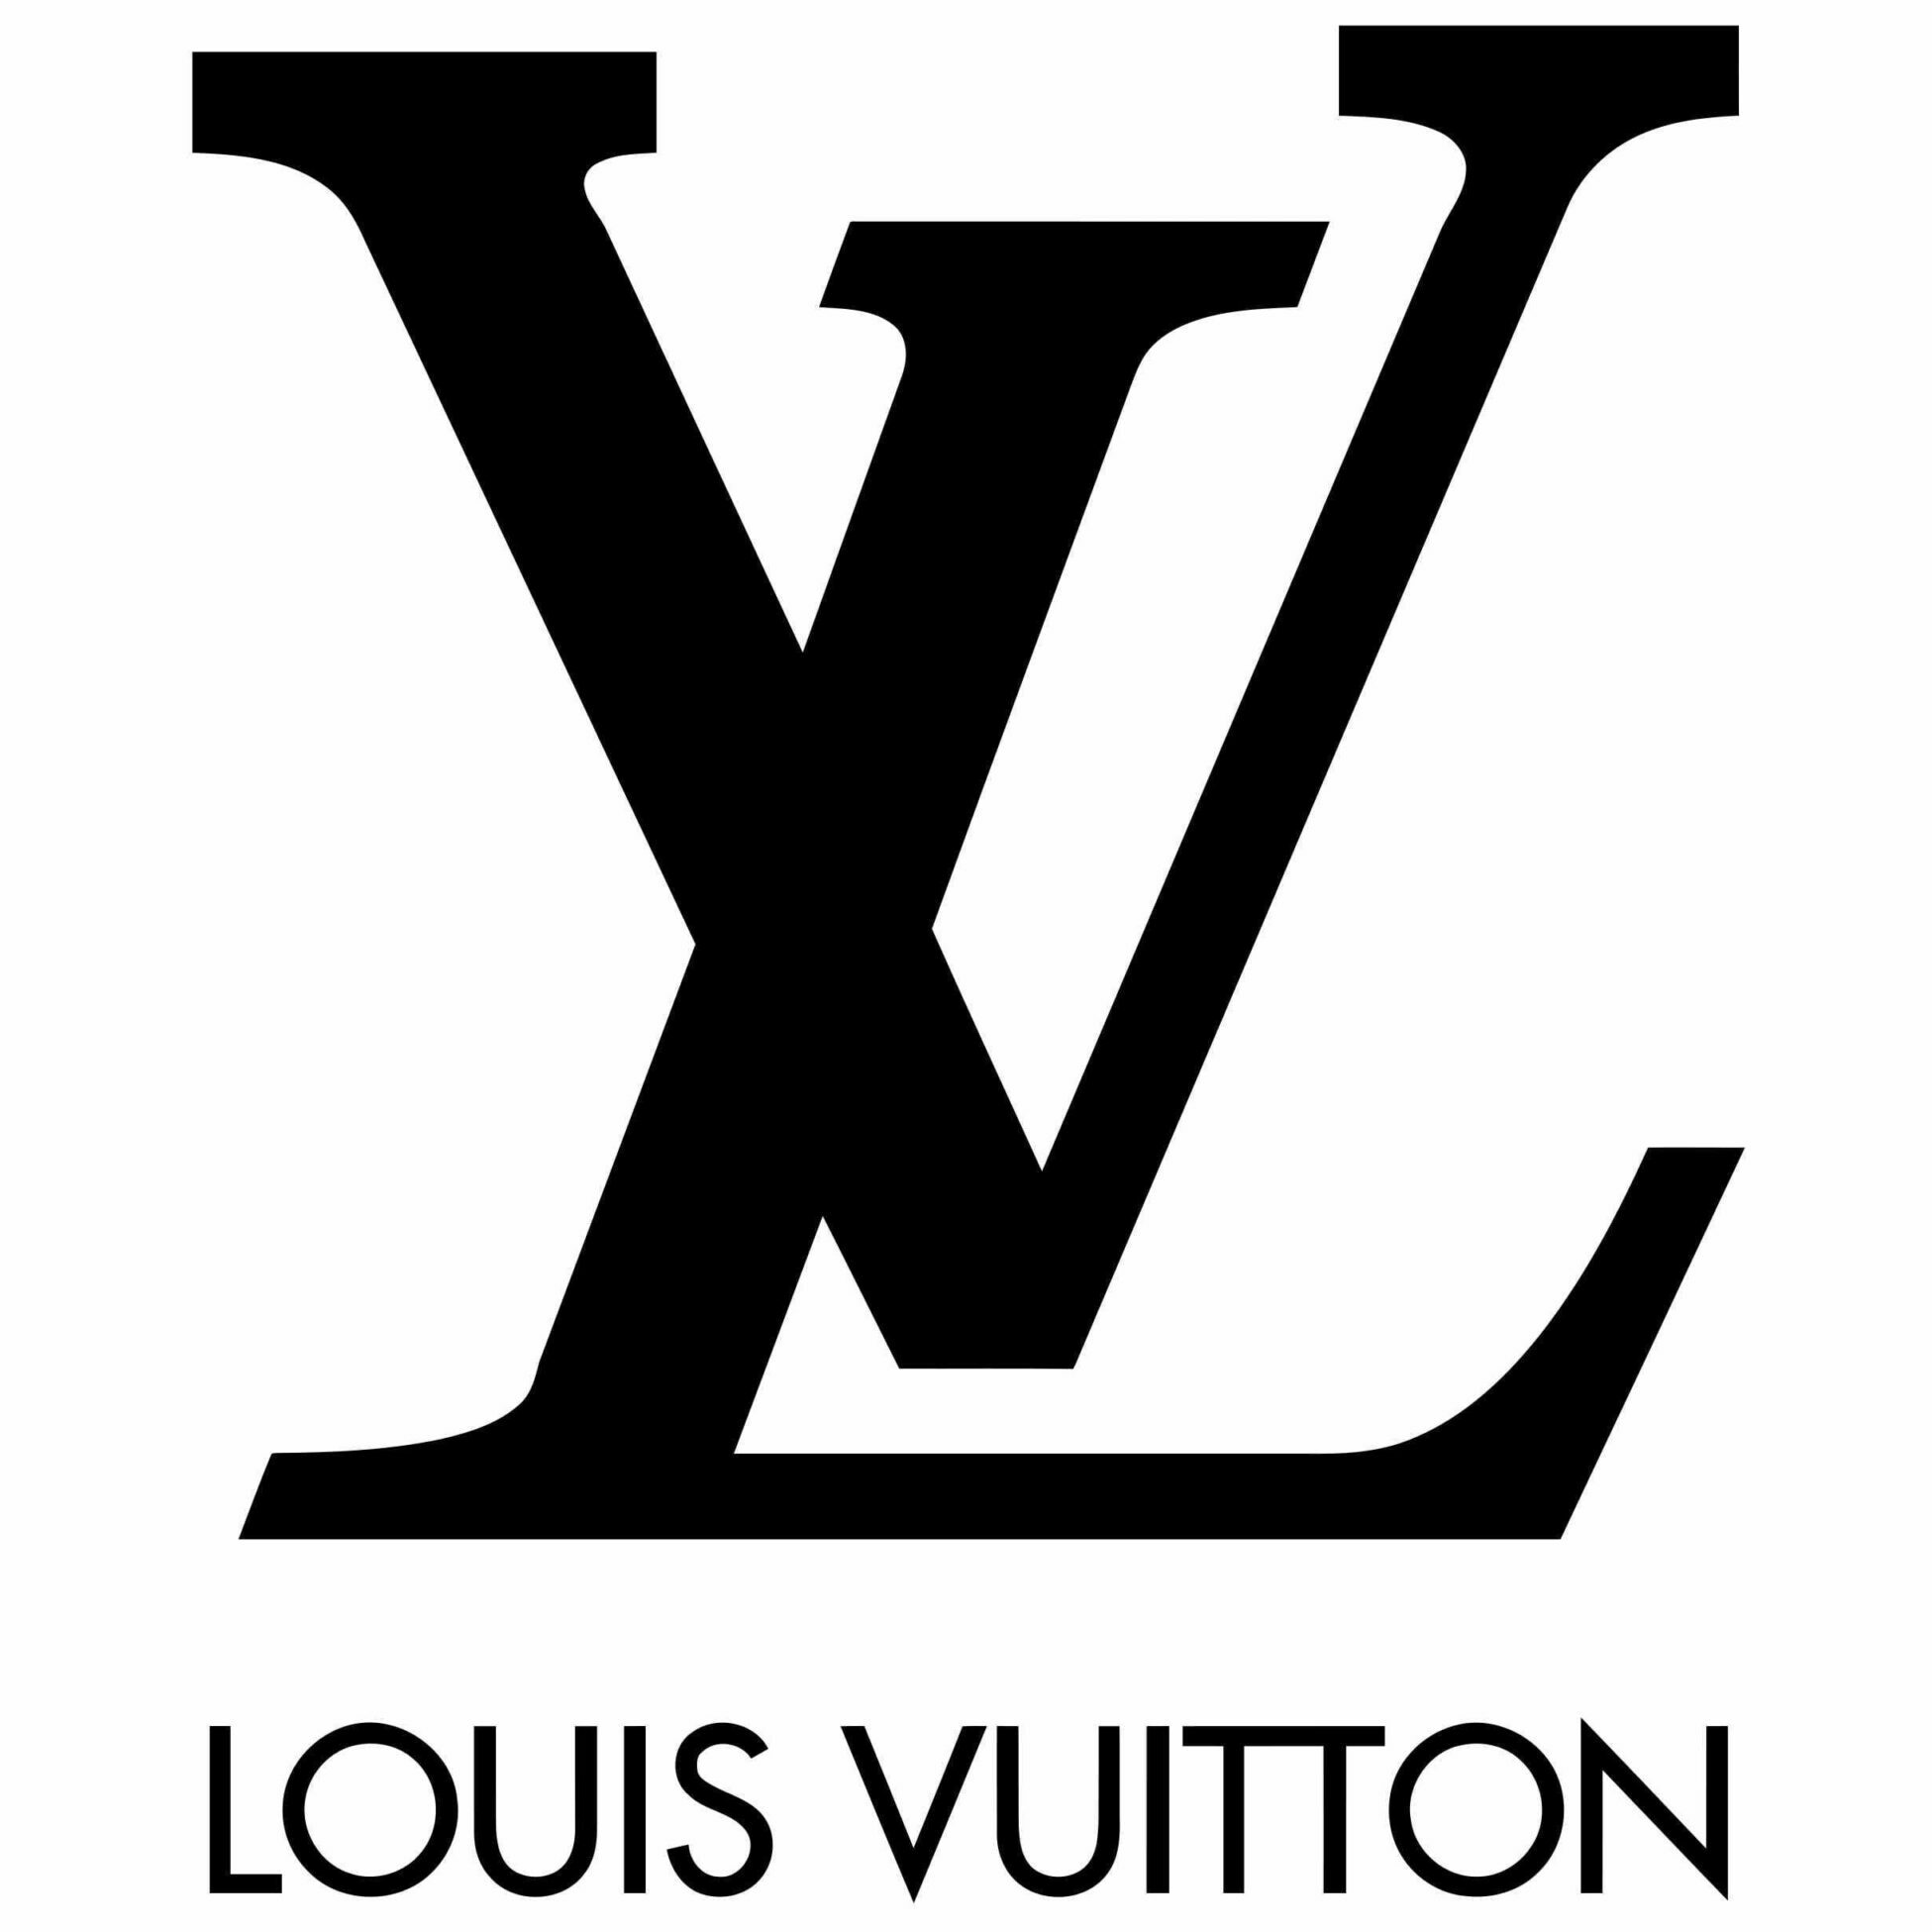 cropped Louis Vuitton logo scaled 1